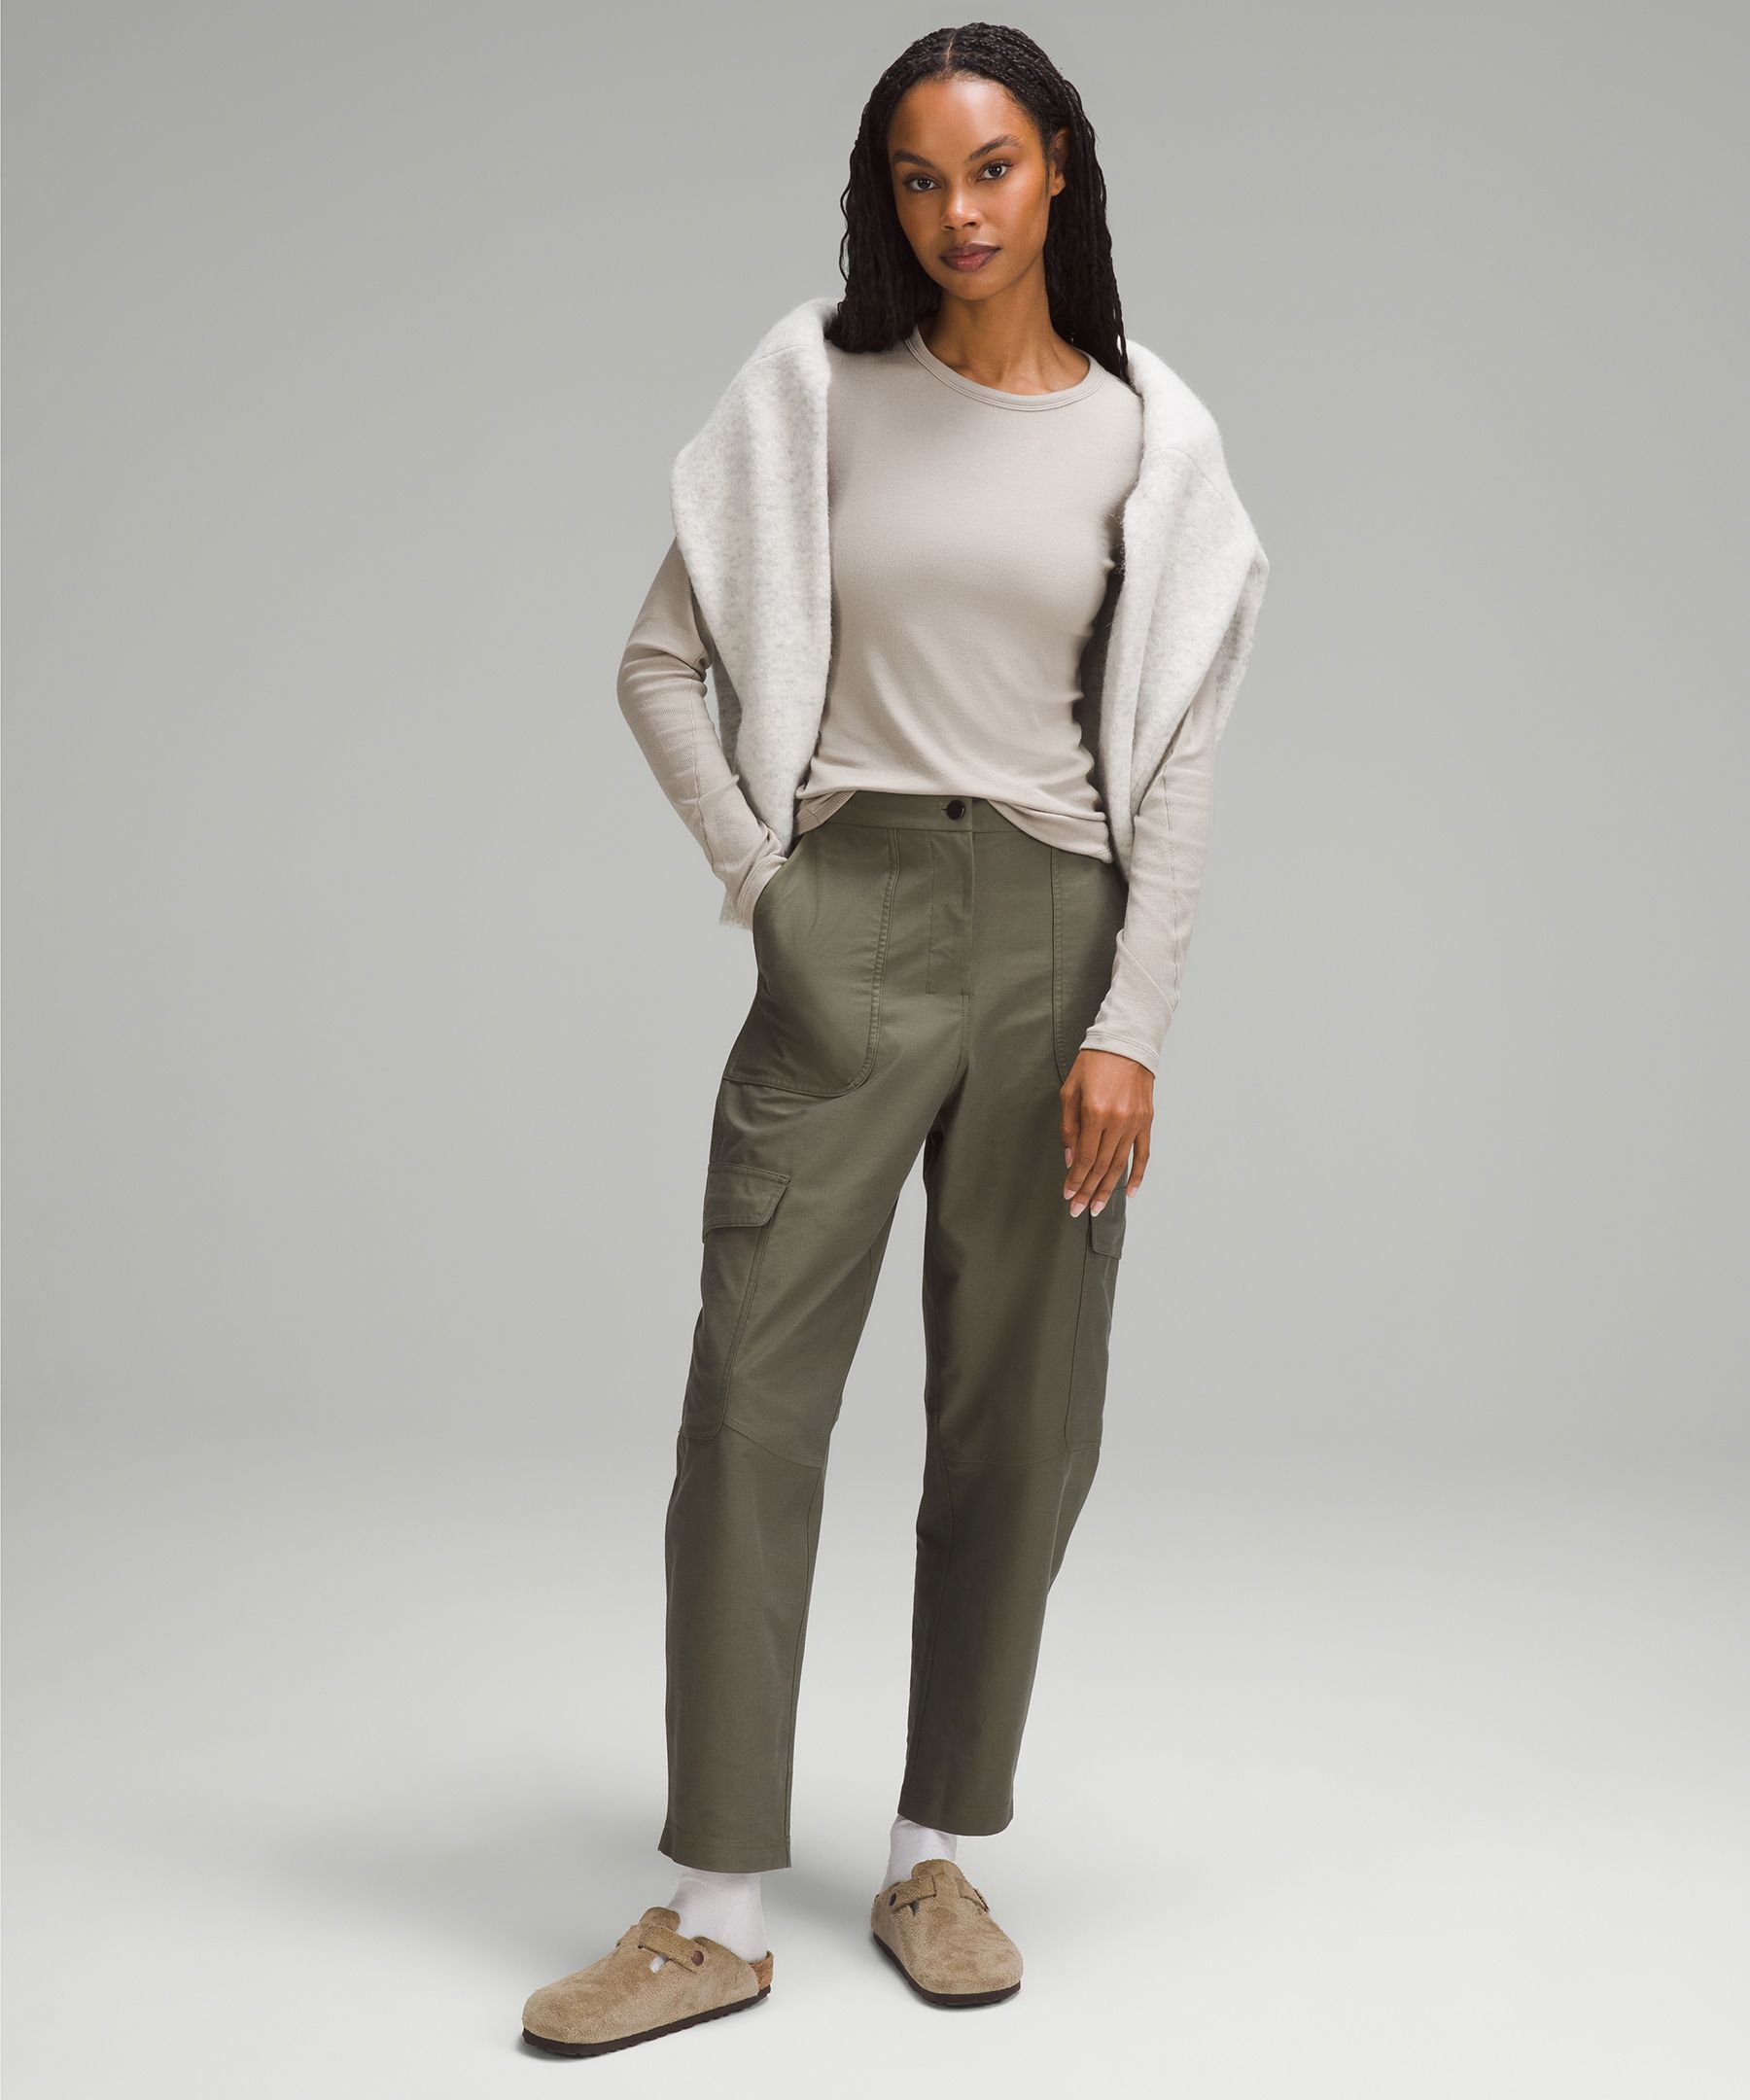 You've Been Warned! You Might Need These New lululemon Cargo Pants:  lululemon Light Utilitech Cargo Pocket High-Rise Pant - The Sweat Edit